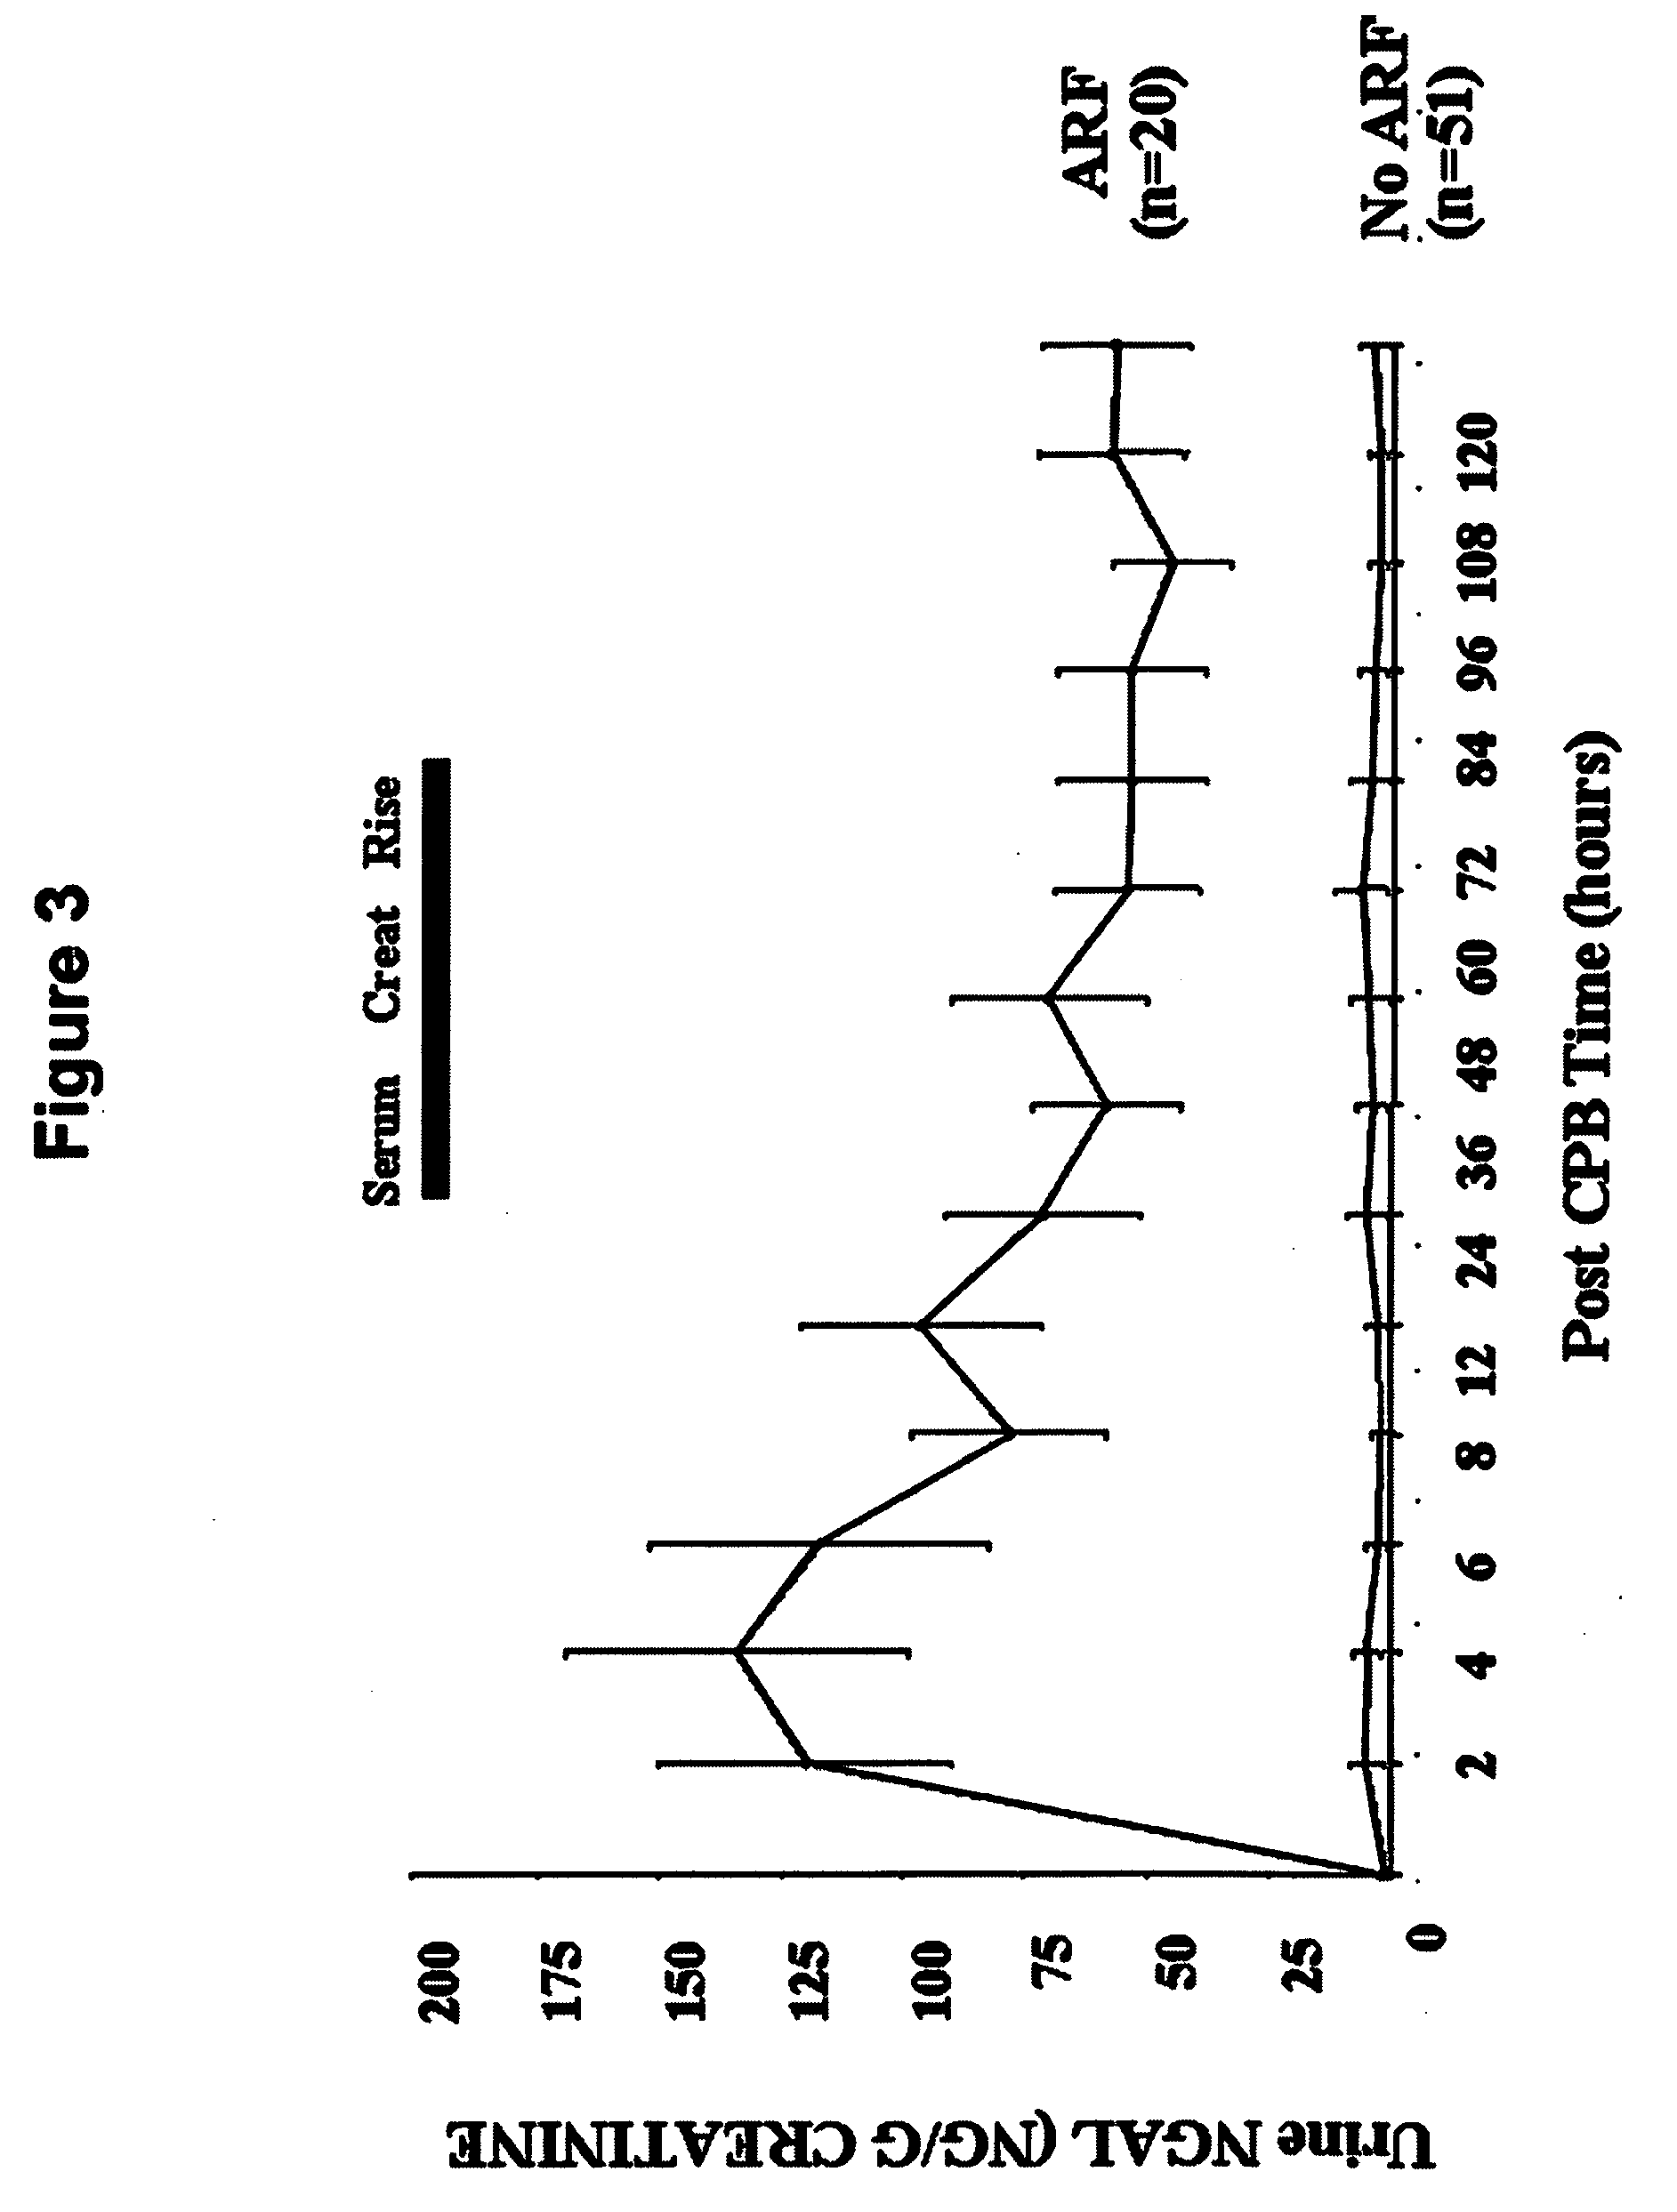 Method for the early detection of renal injury